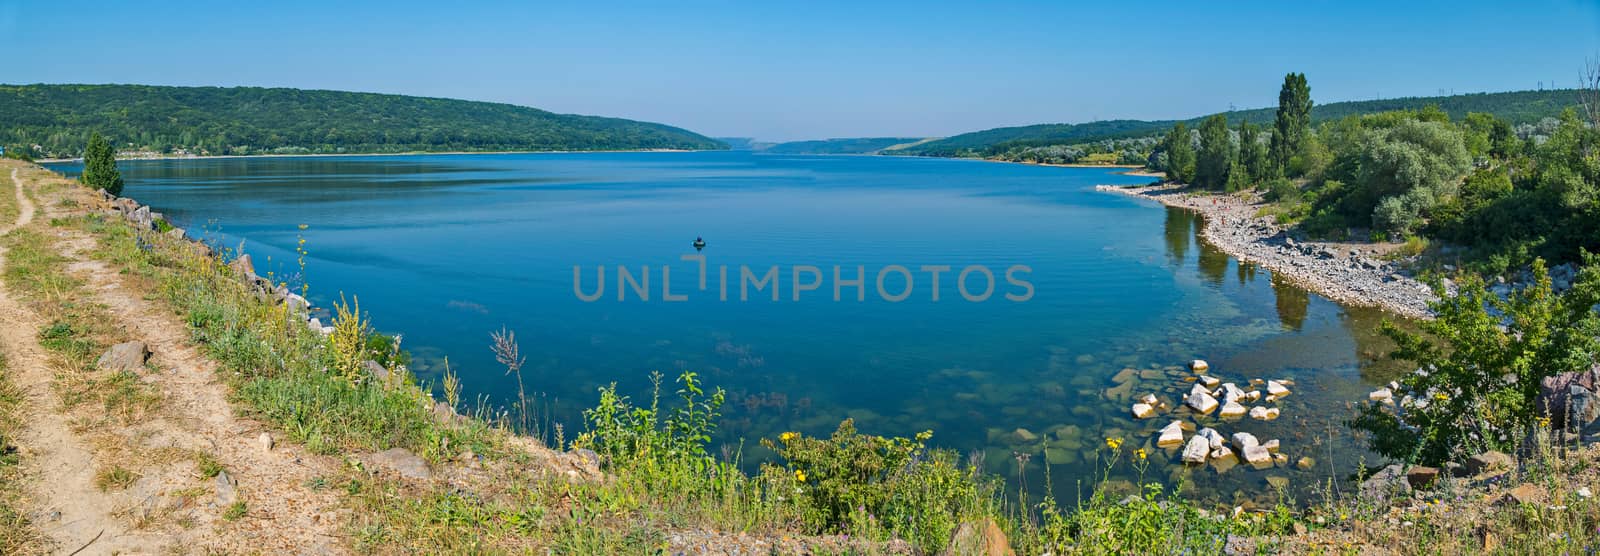 A beautiful panorama of the lake with a clear blue water located in a mountainous area. by Adamchuk